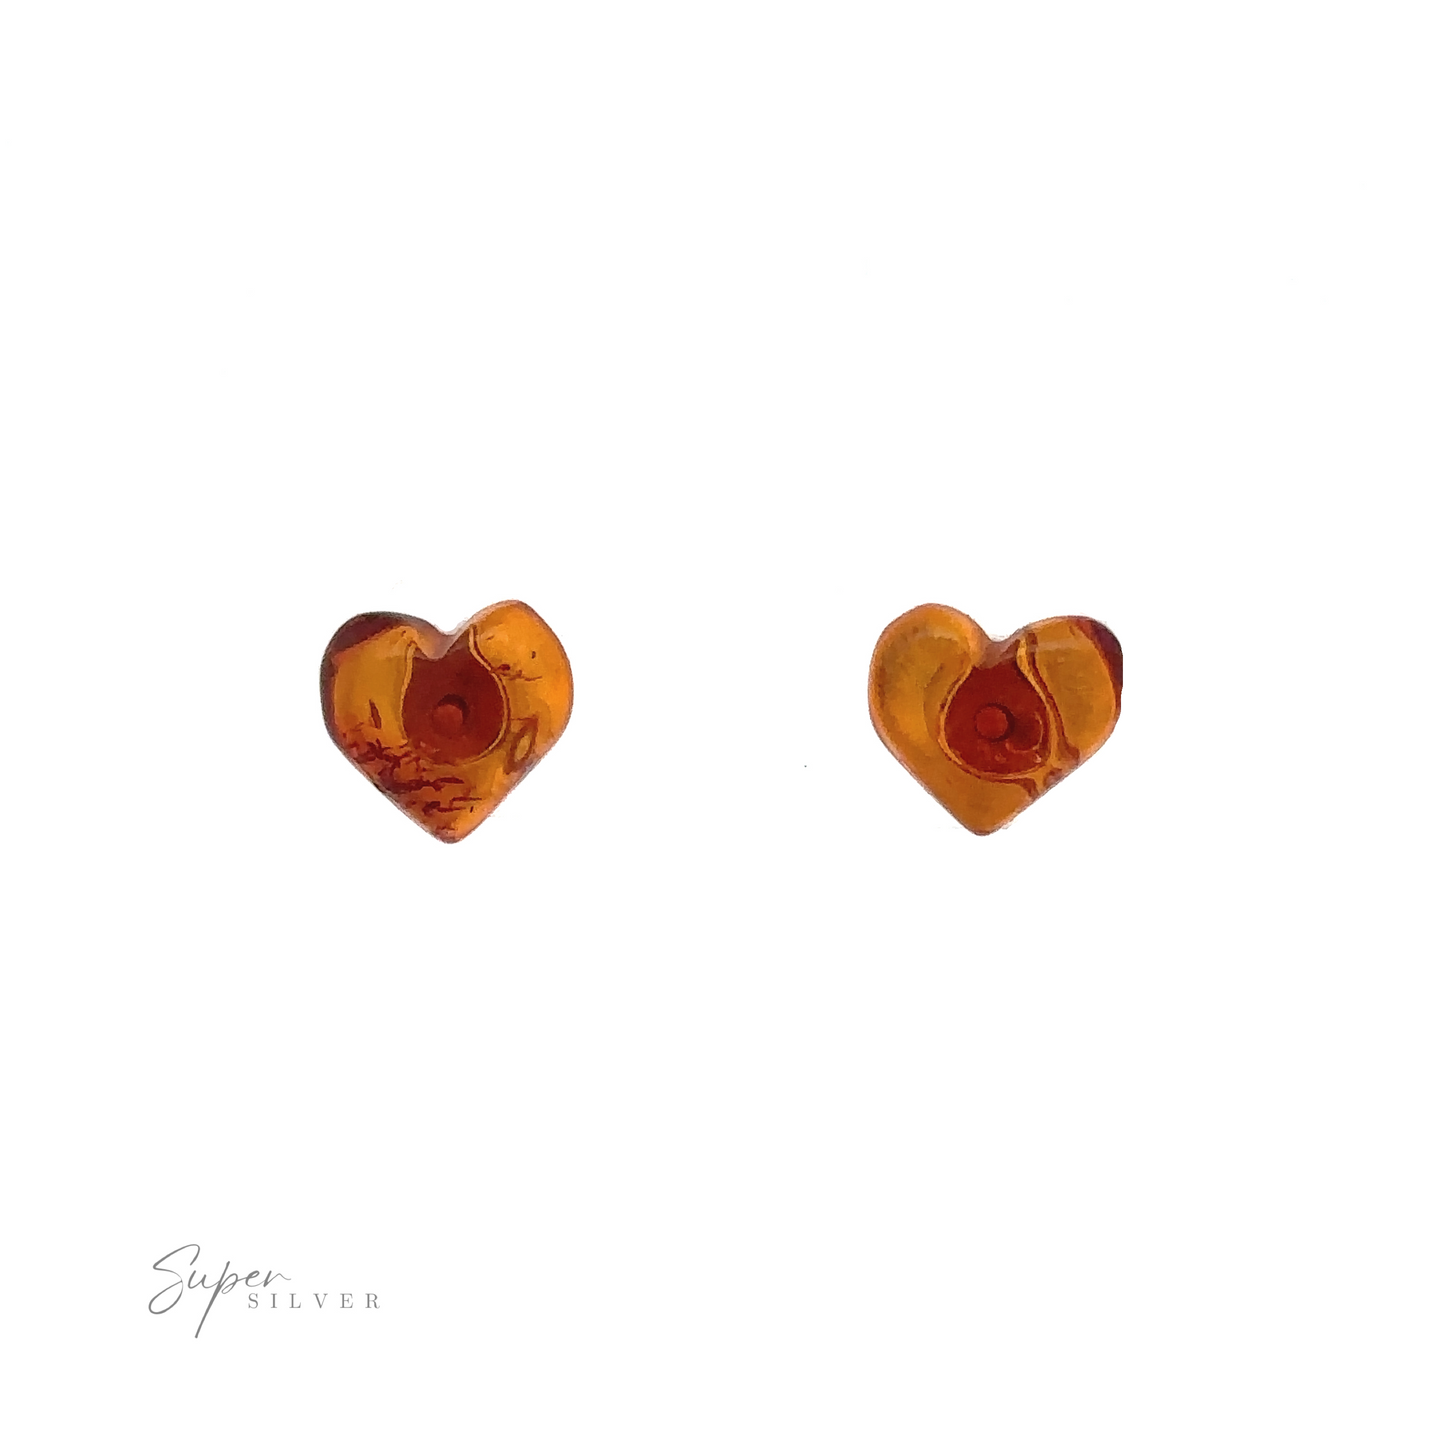 
                  
                    A pair of heart-shaped amber-colored earrings against a white background with "Super Silver" text in the bottom left corner. These stunning Amber Heart Studs exemplify exquisite craftsmanship, perfect for any fashion-forward enthusiast.
                  
                